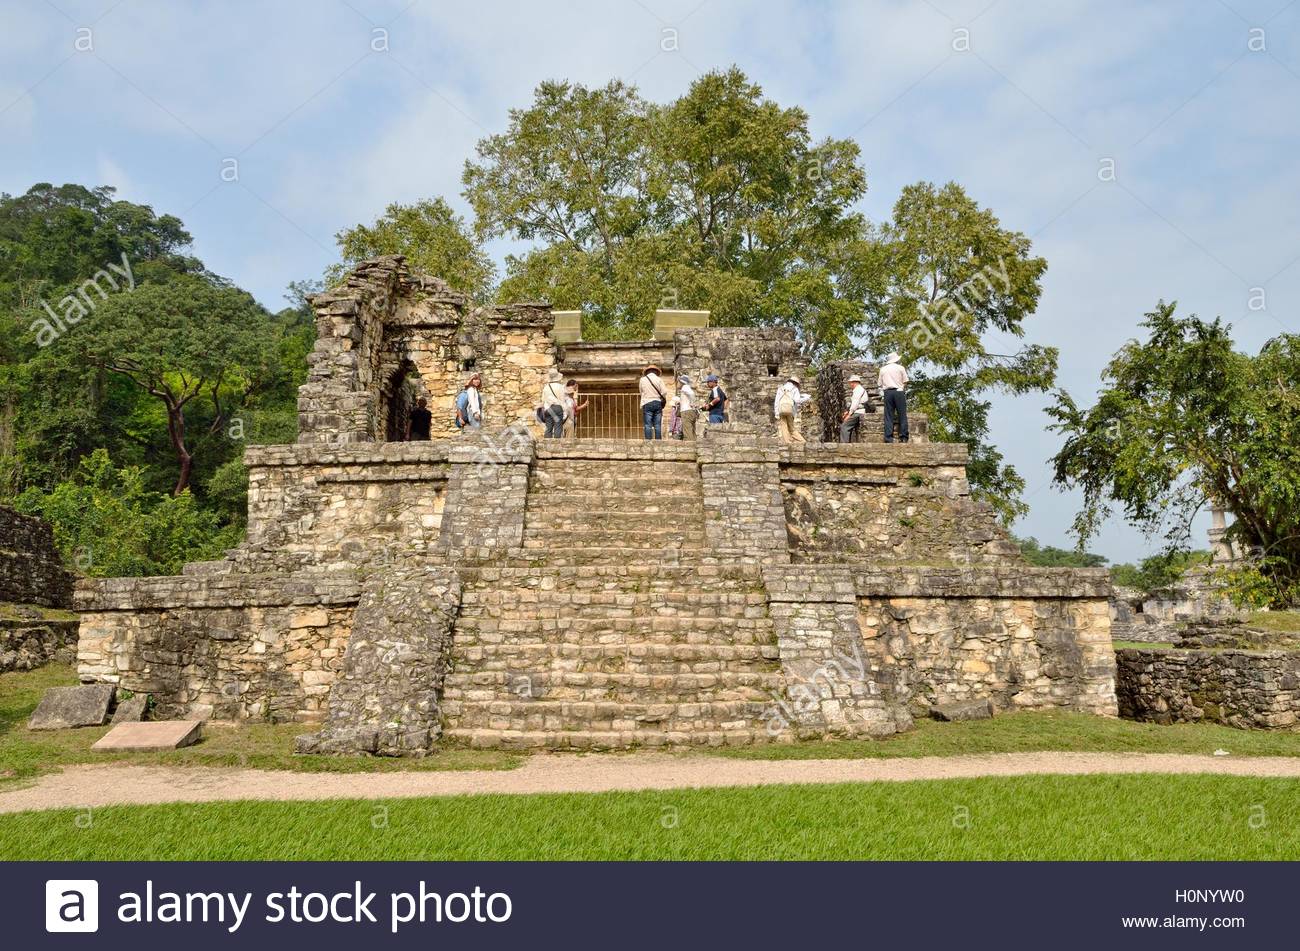 tourist group on templo xiv mayan ruins of palenque chiapas mexico H0NYW0